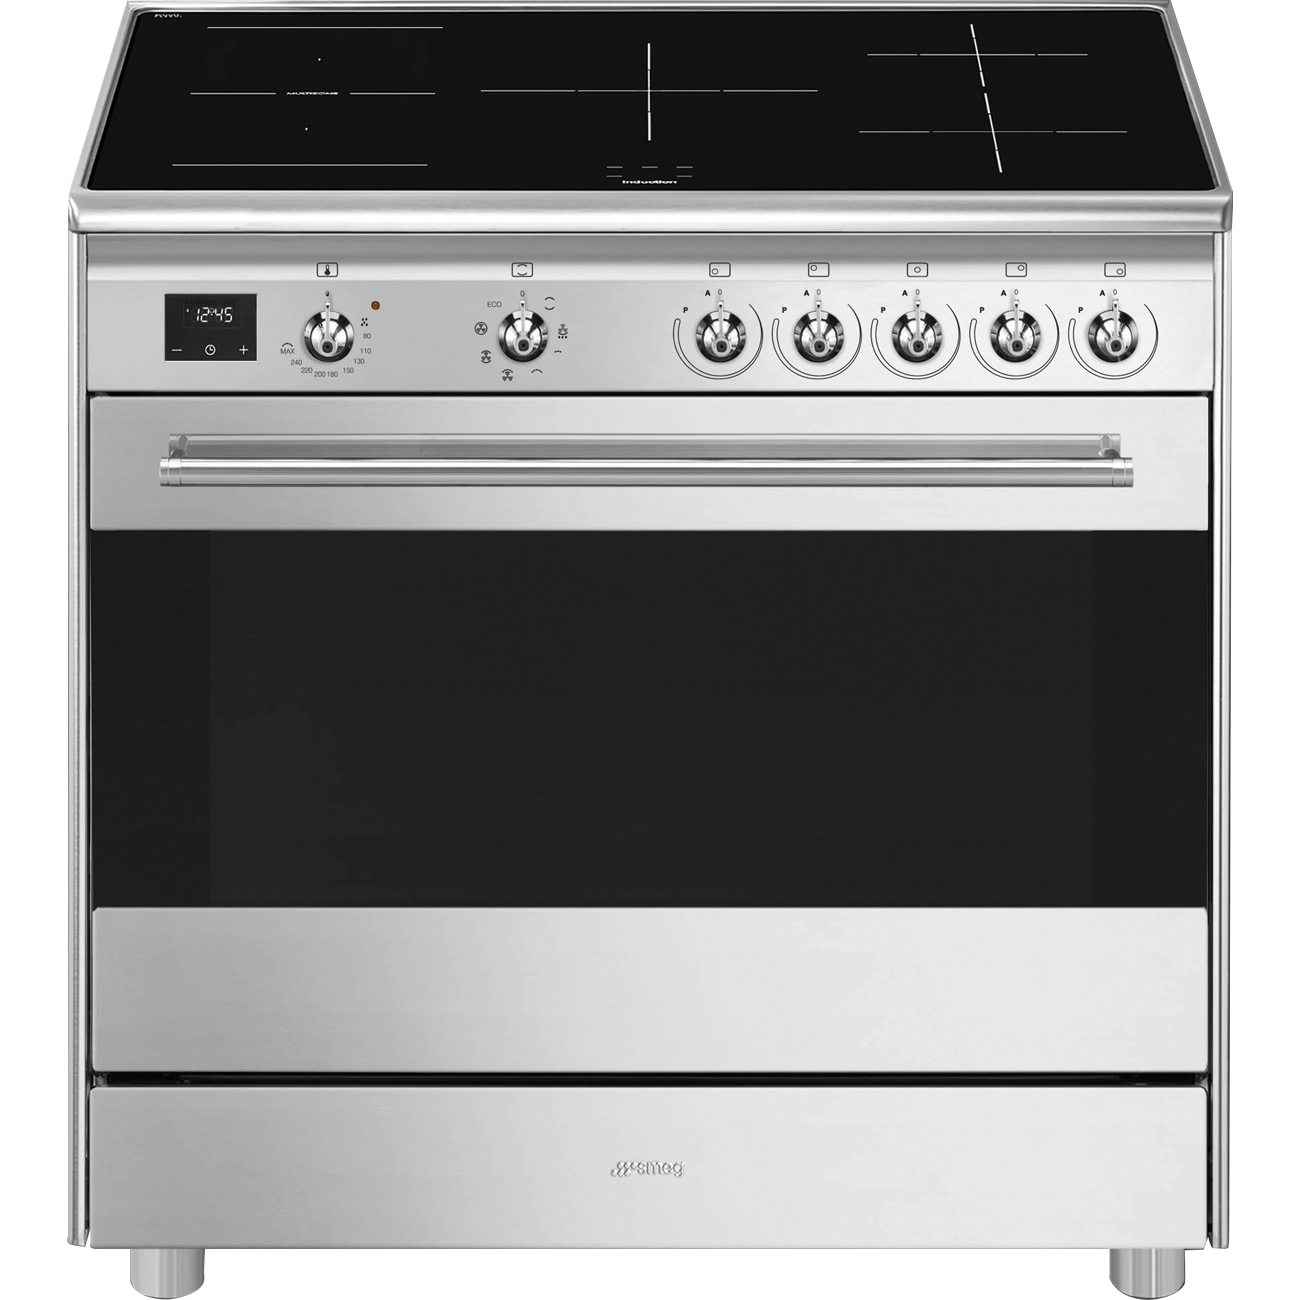 Smeg Stainless steel Cooker with Induction Hob_1